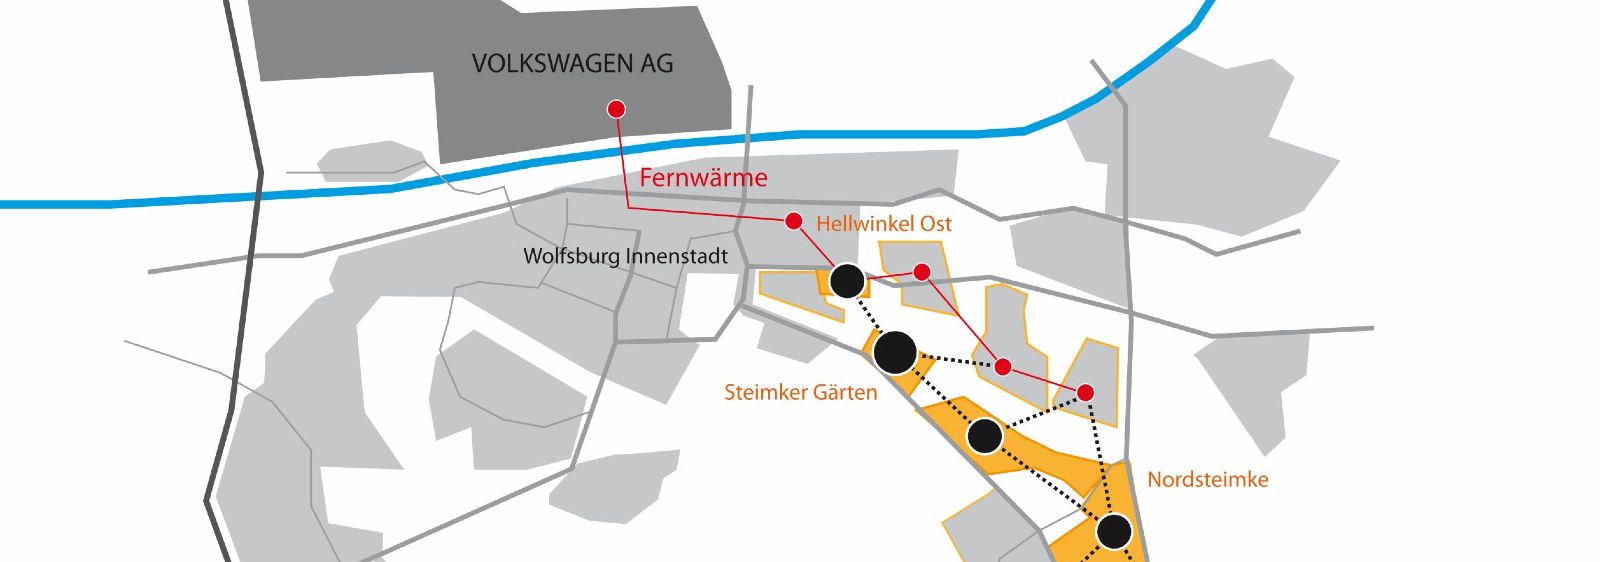 Networked neighborhoods in the southeast of the city of Wolfsburg